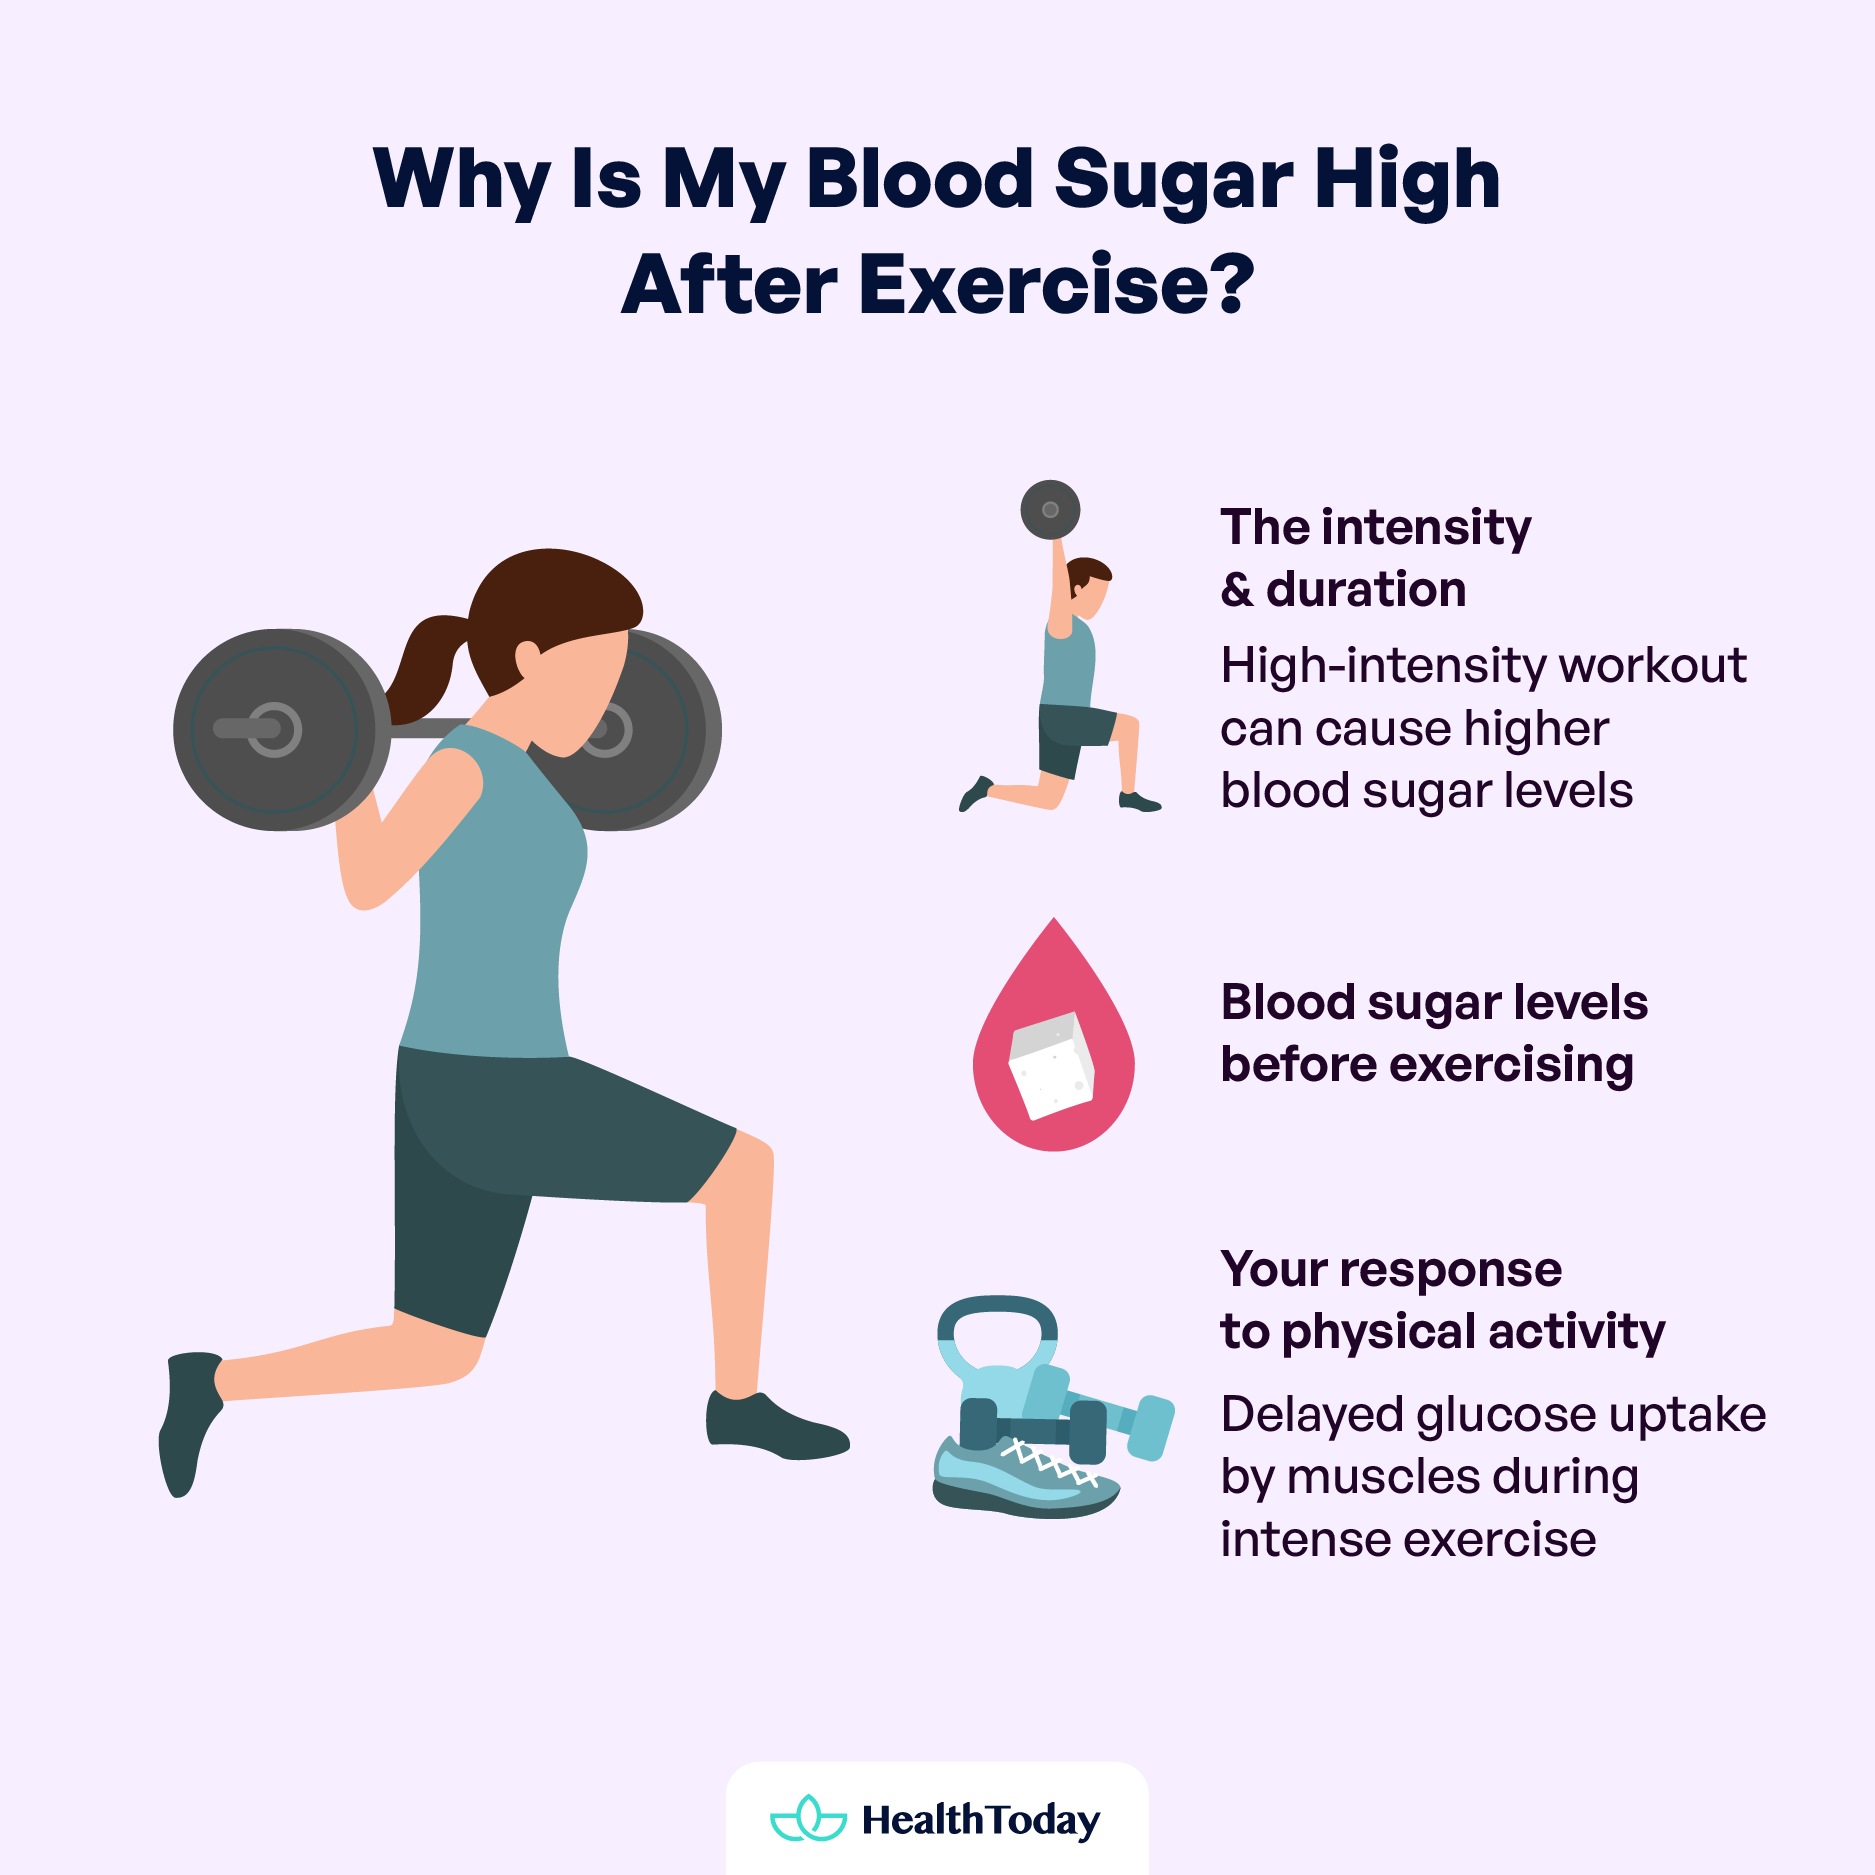 Does Exercise Raise Blood Sugar or Lower It Diabetes and Exercises 02 1